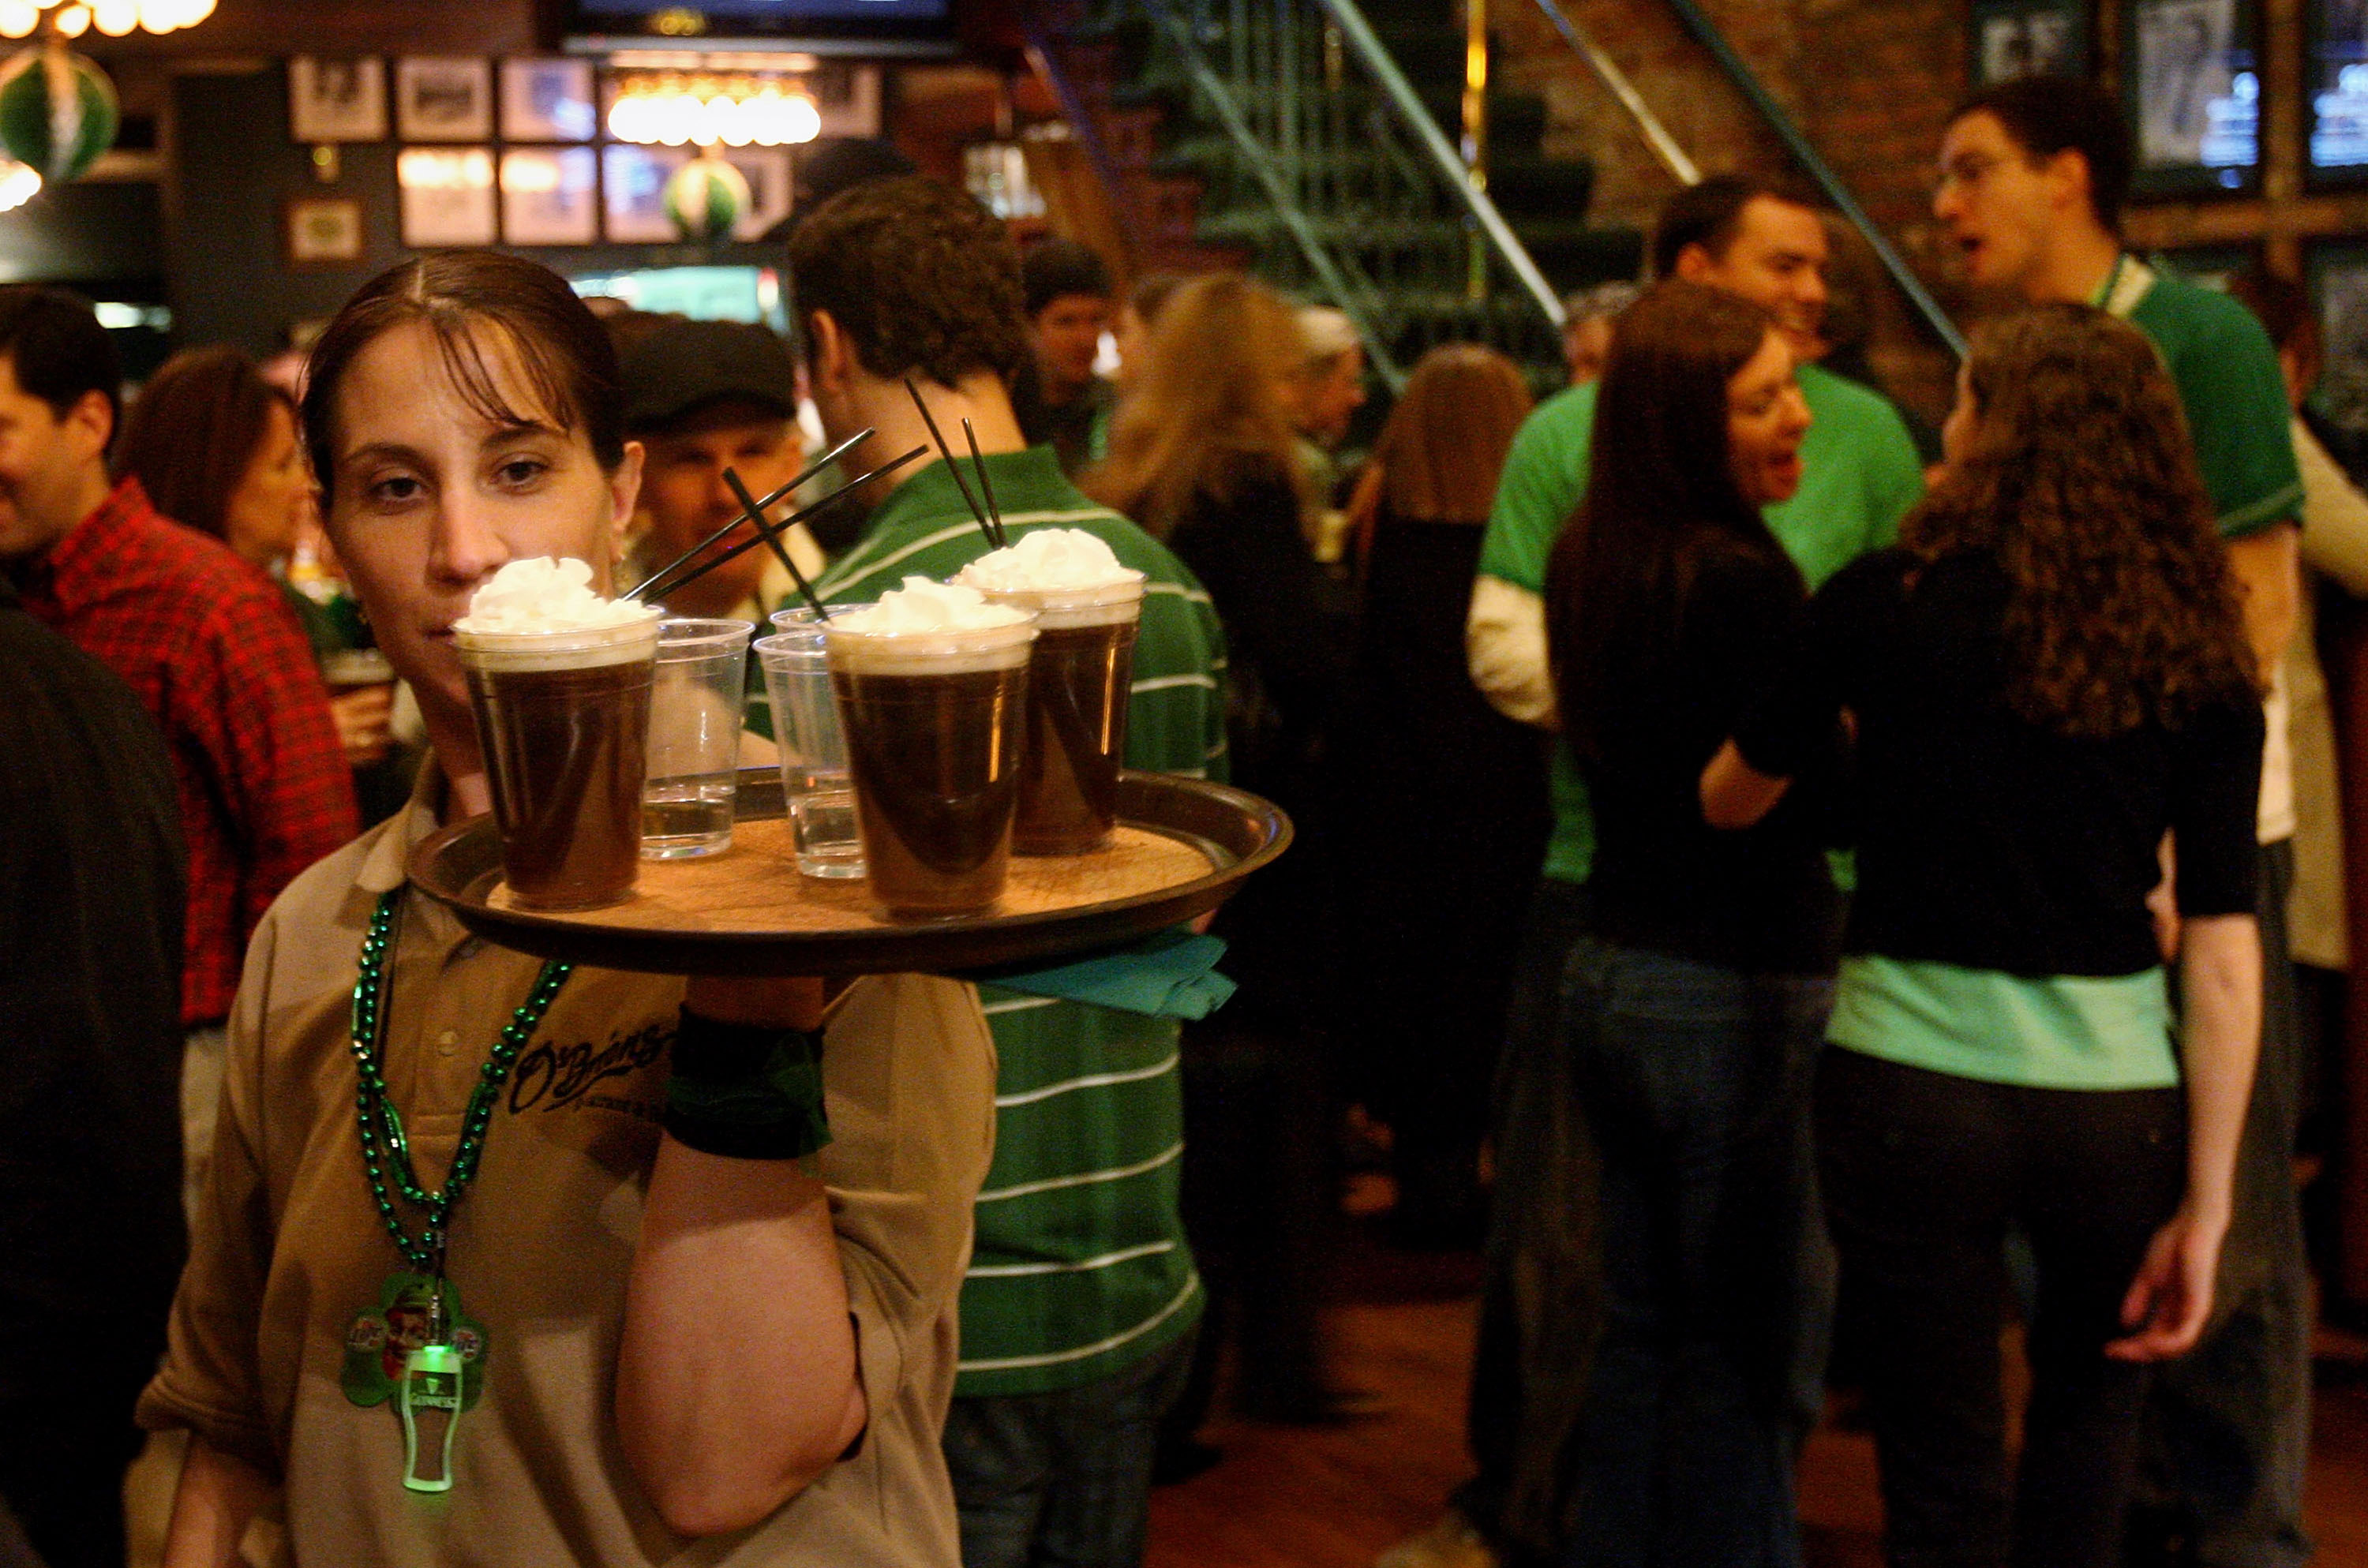 Top local bars and restaurants to celebrate St. Patrick’s Day